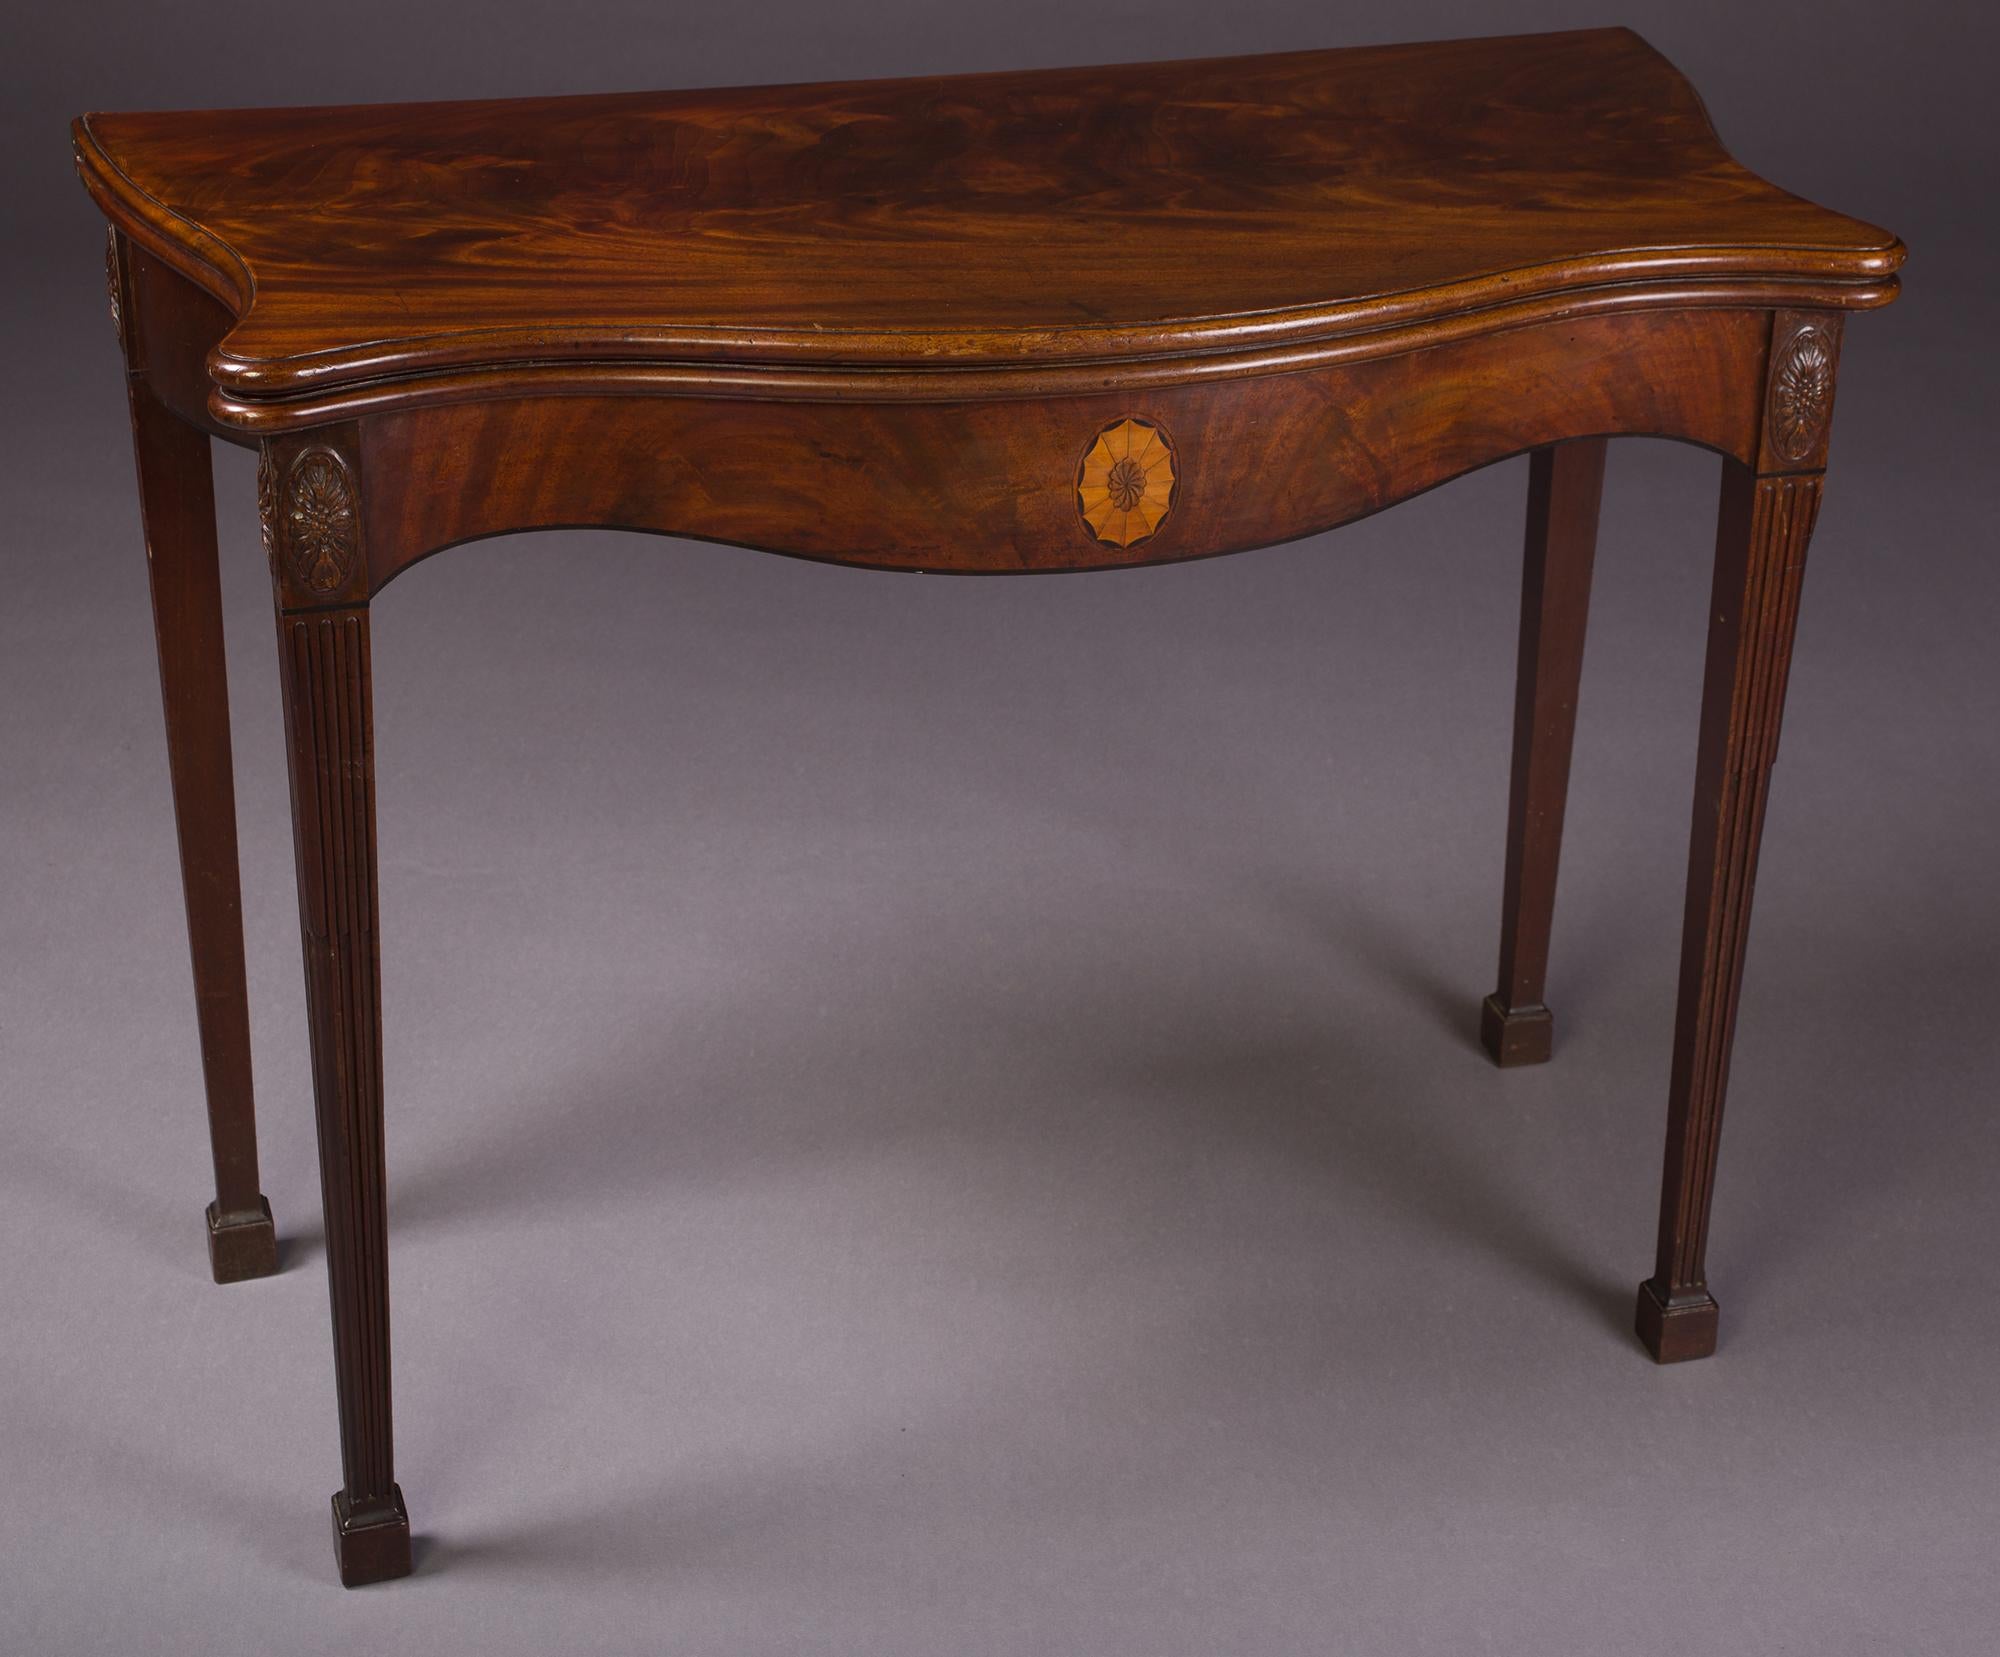 A George III Chippendale period Mahogany card table.
The well figured serpentine top with a moulded edge,
above a veneered frieze, with carved mounts a central satinwood sun burst,
resting on square tapered fluted legs with block feet.